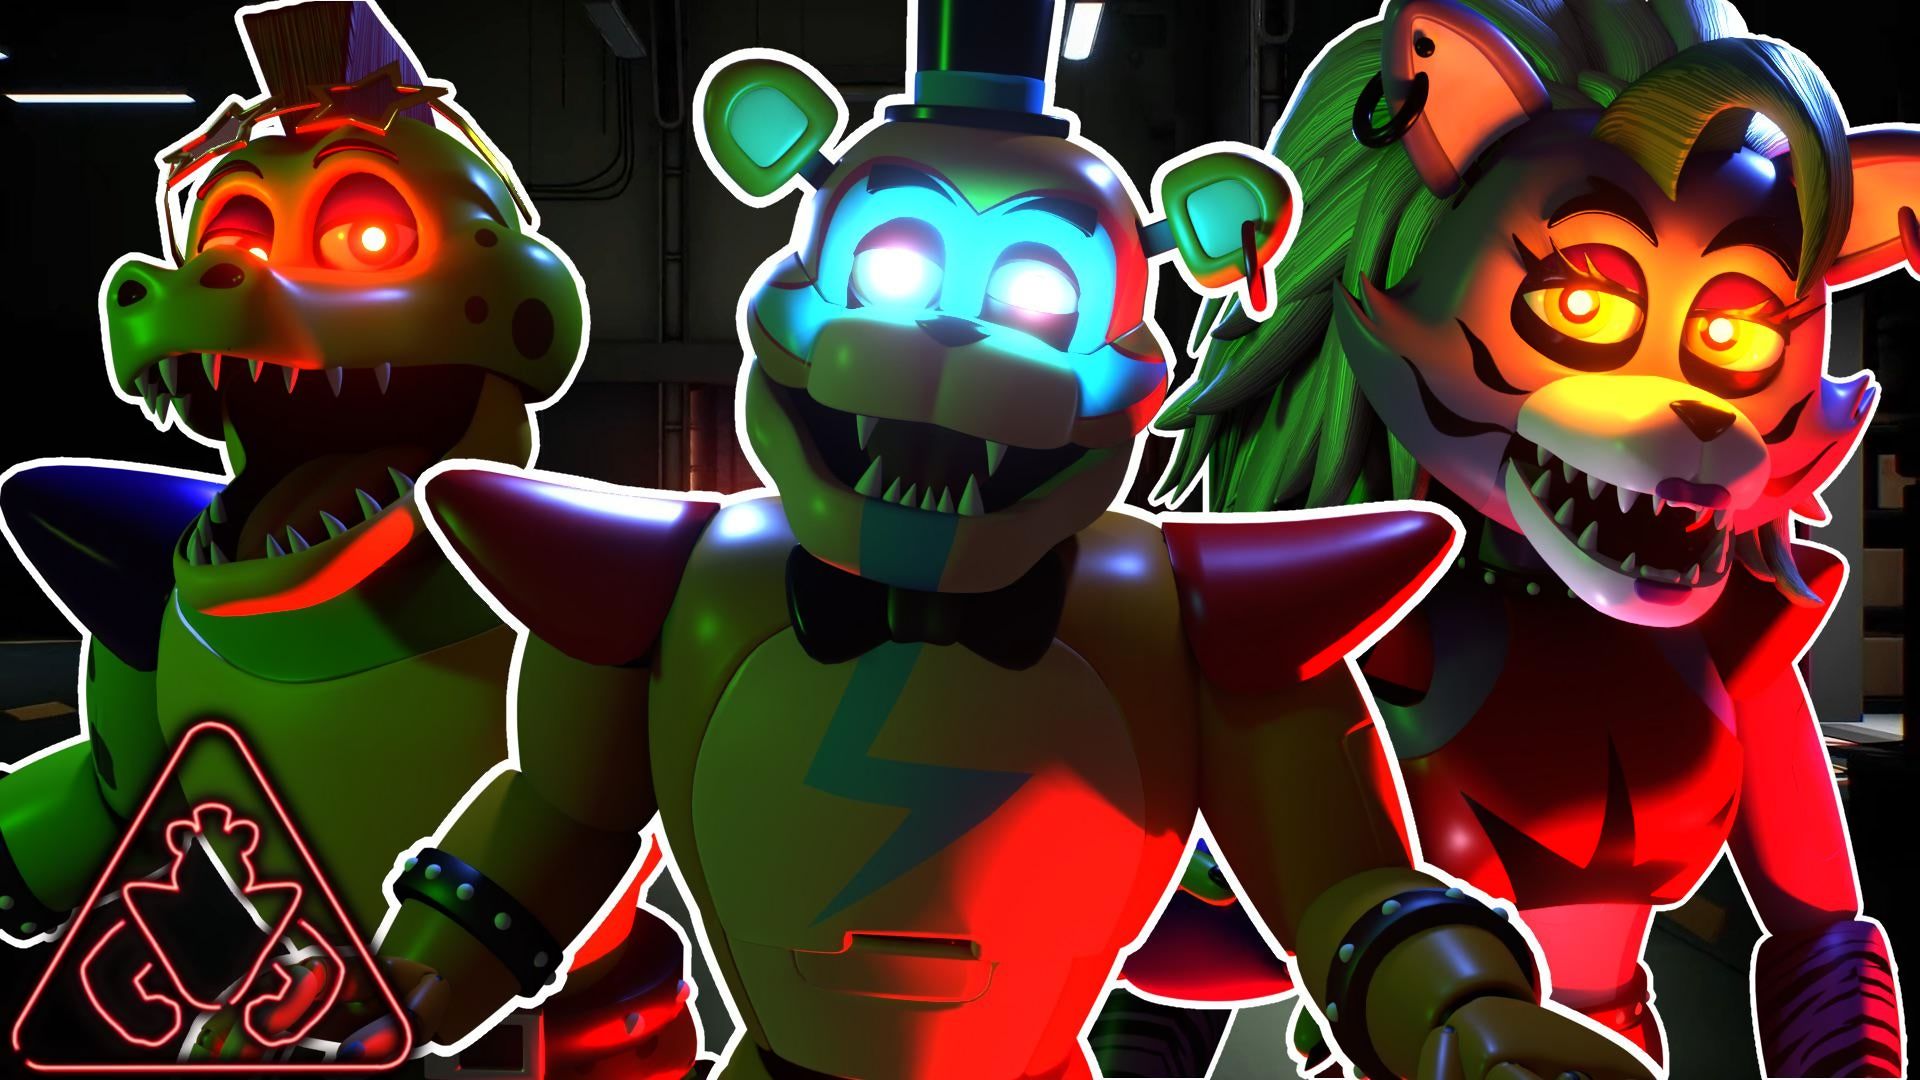 five nights at freddy's: security breach, video game, five nights at freddy's